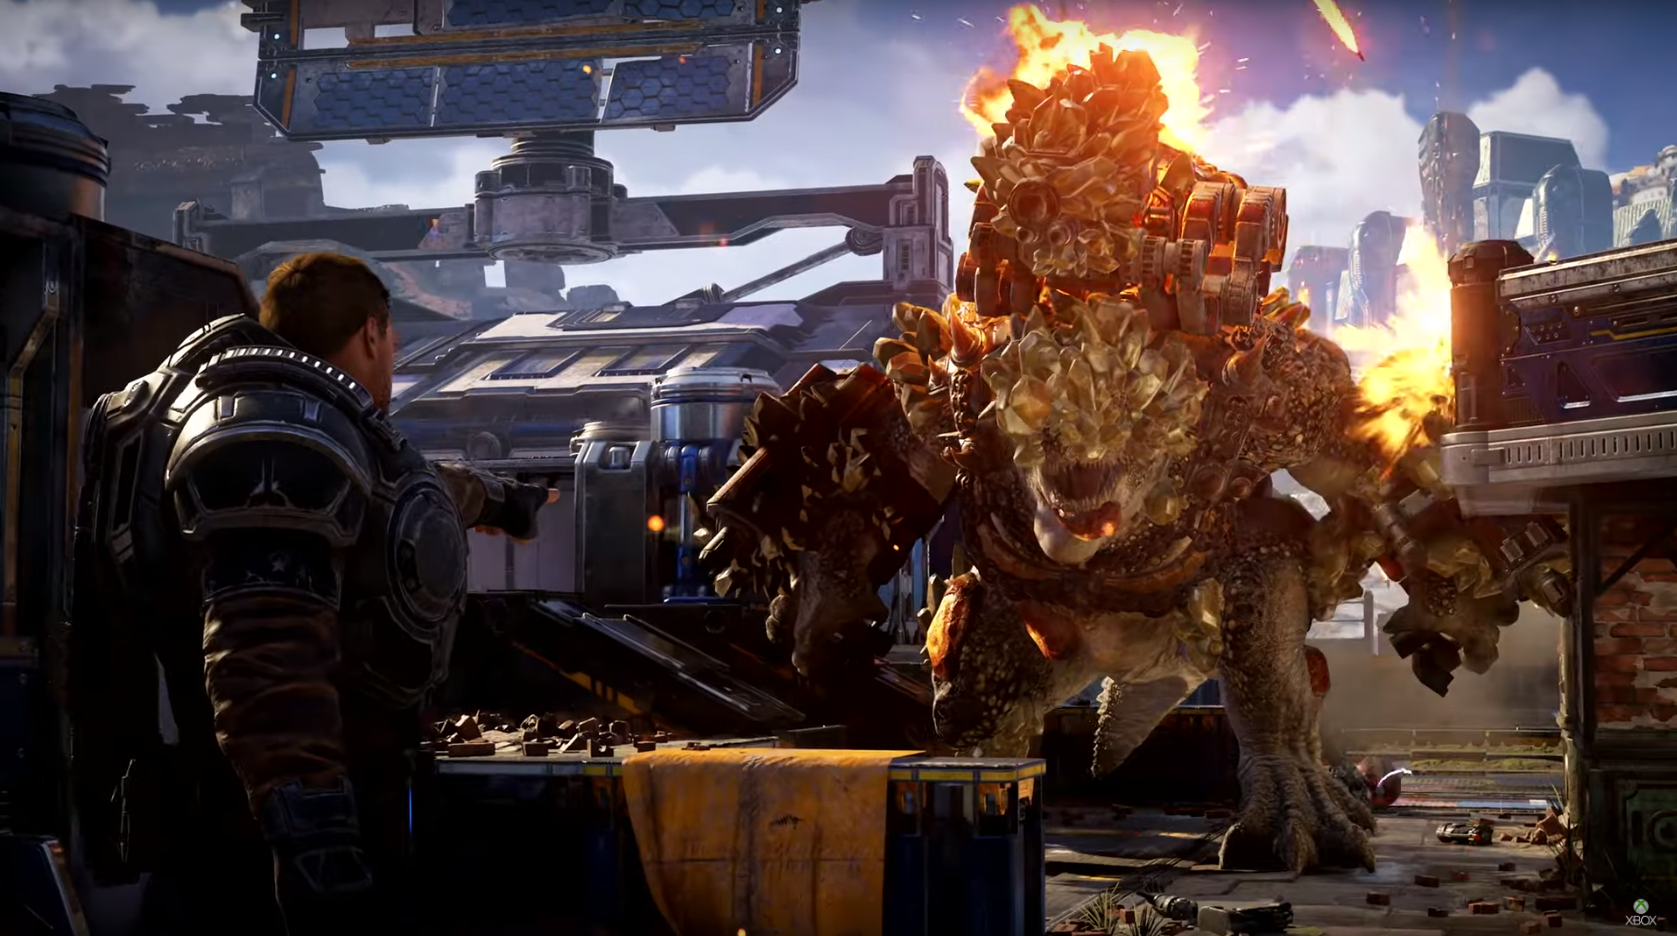 Image for Here's your first look at Gears 5 Horde gameplay